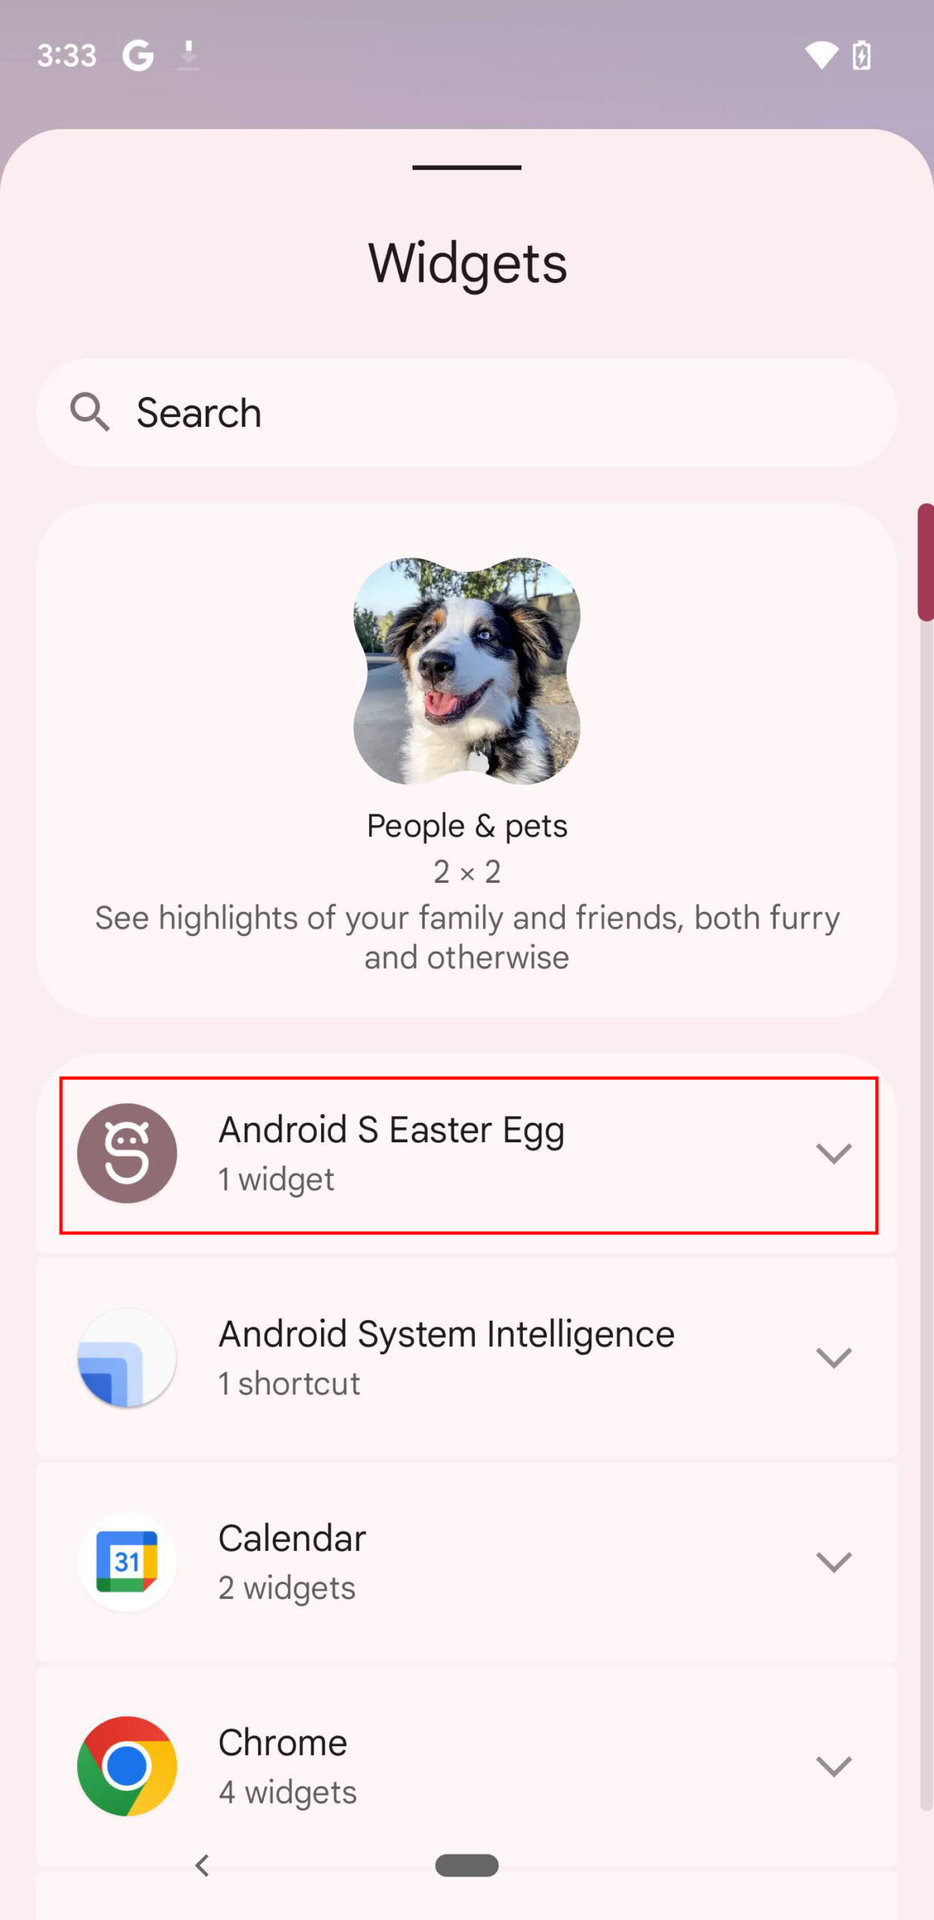 Android S Easter Egg widget 2